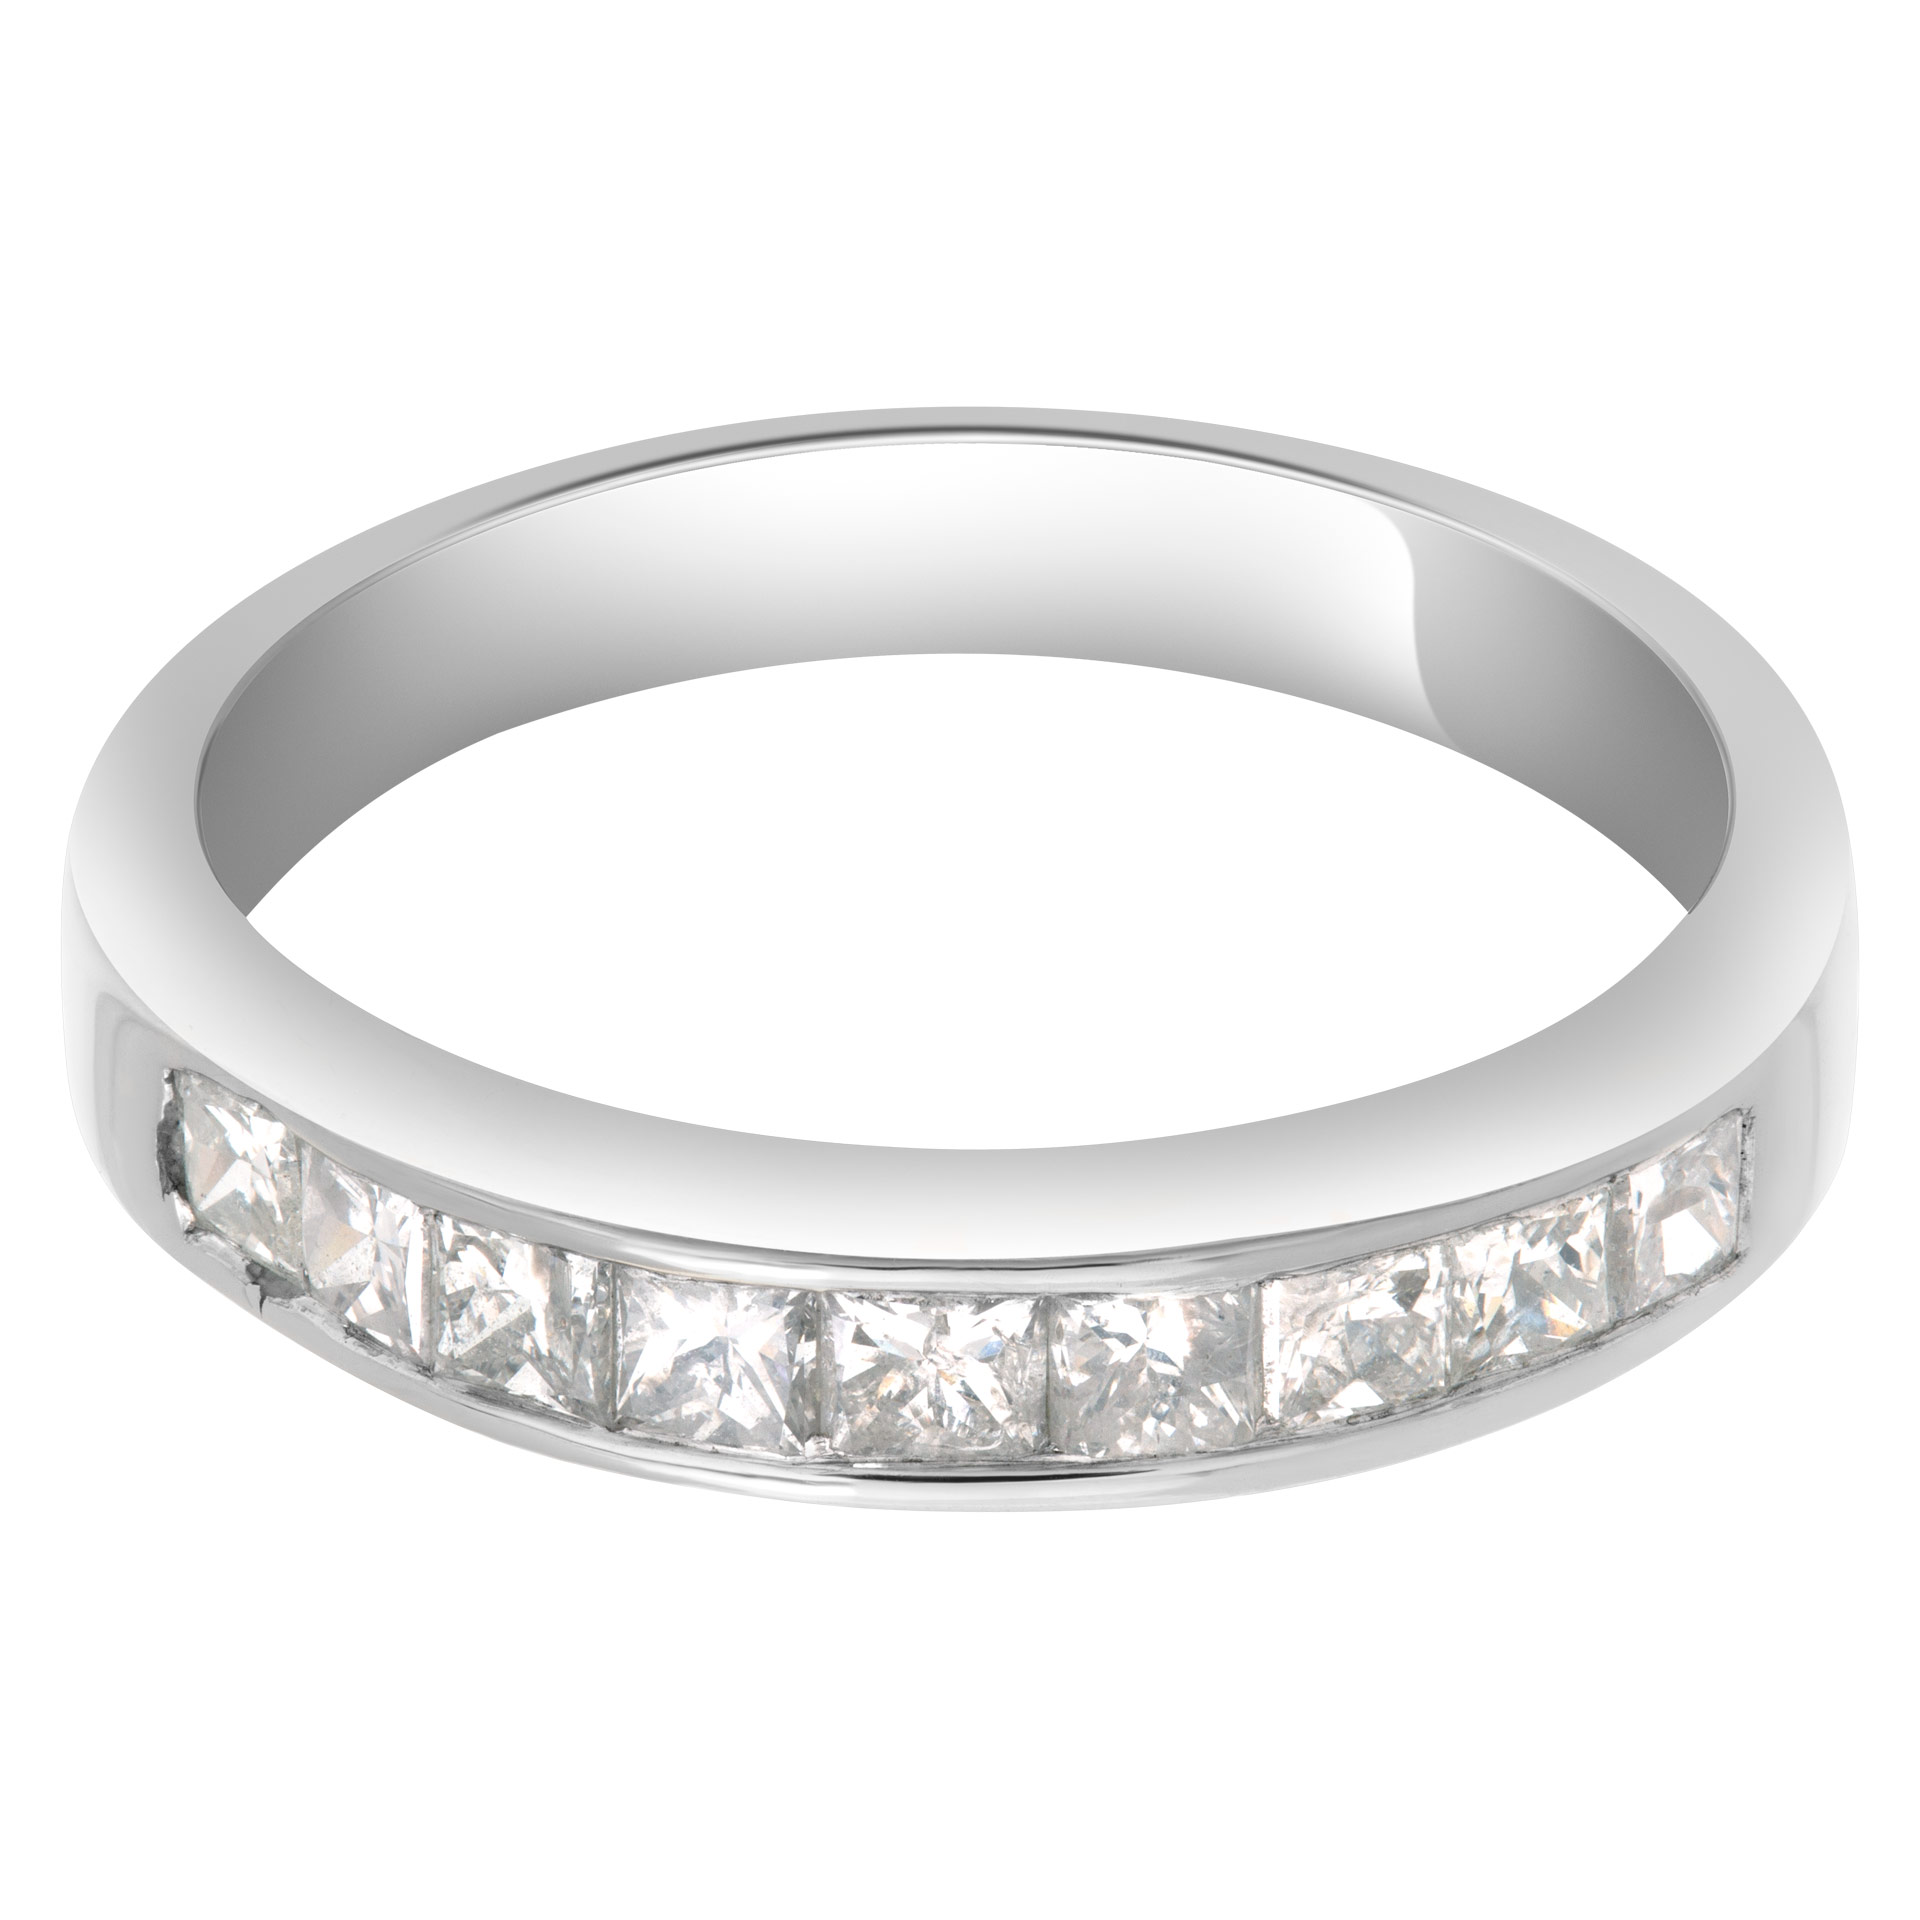 Beautiful semi Diamond Eternity Band and Ring in 14k white gold